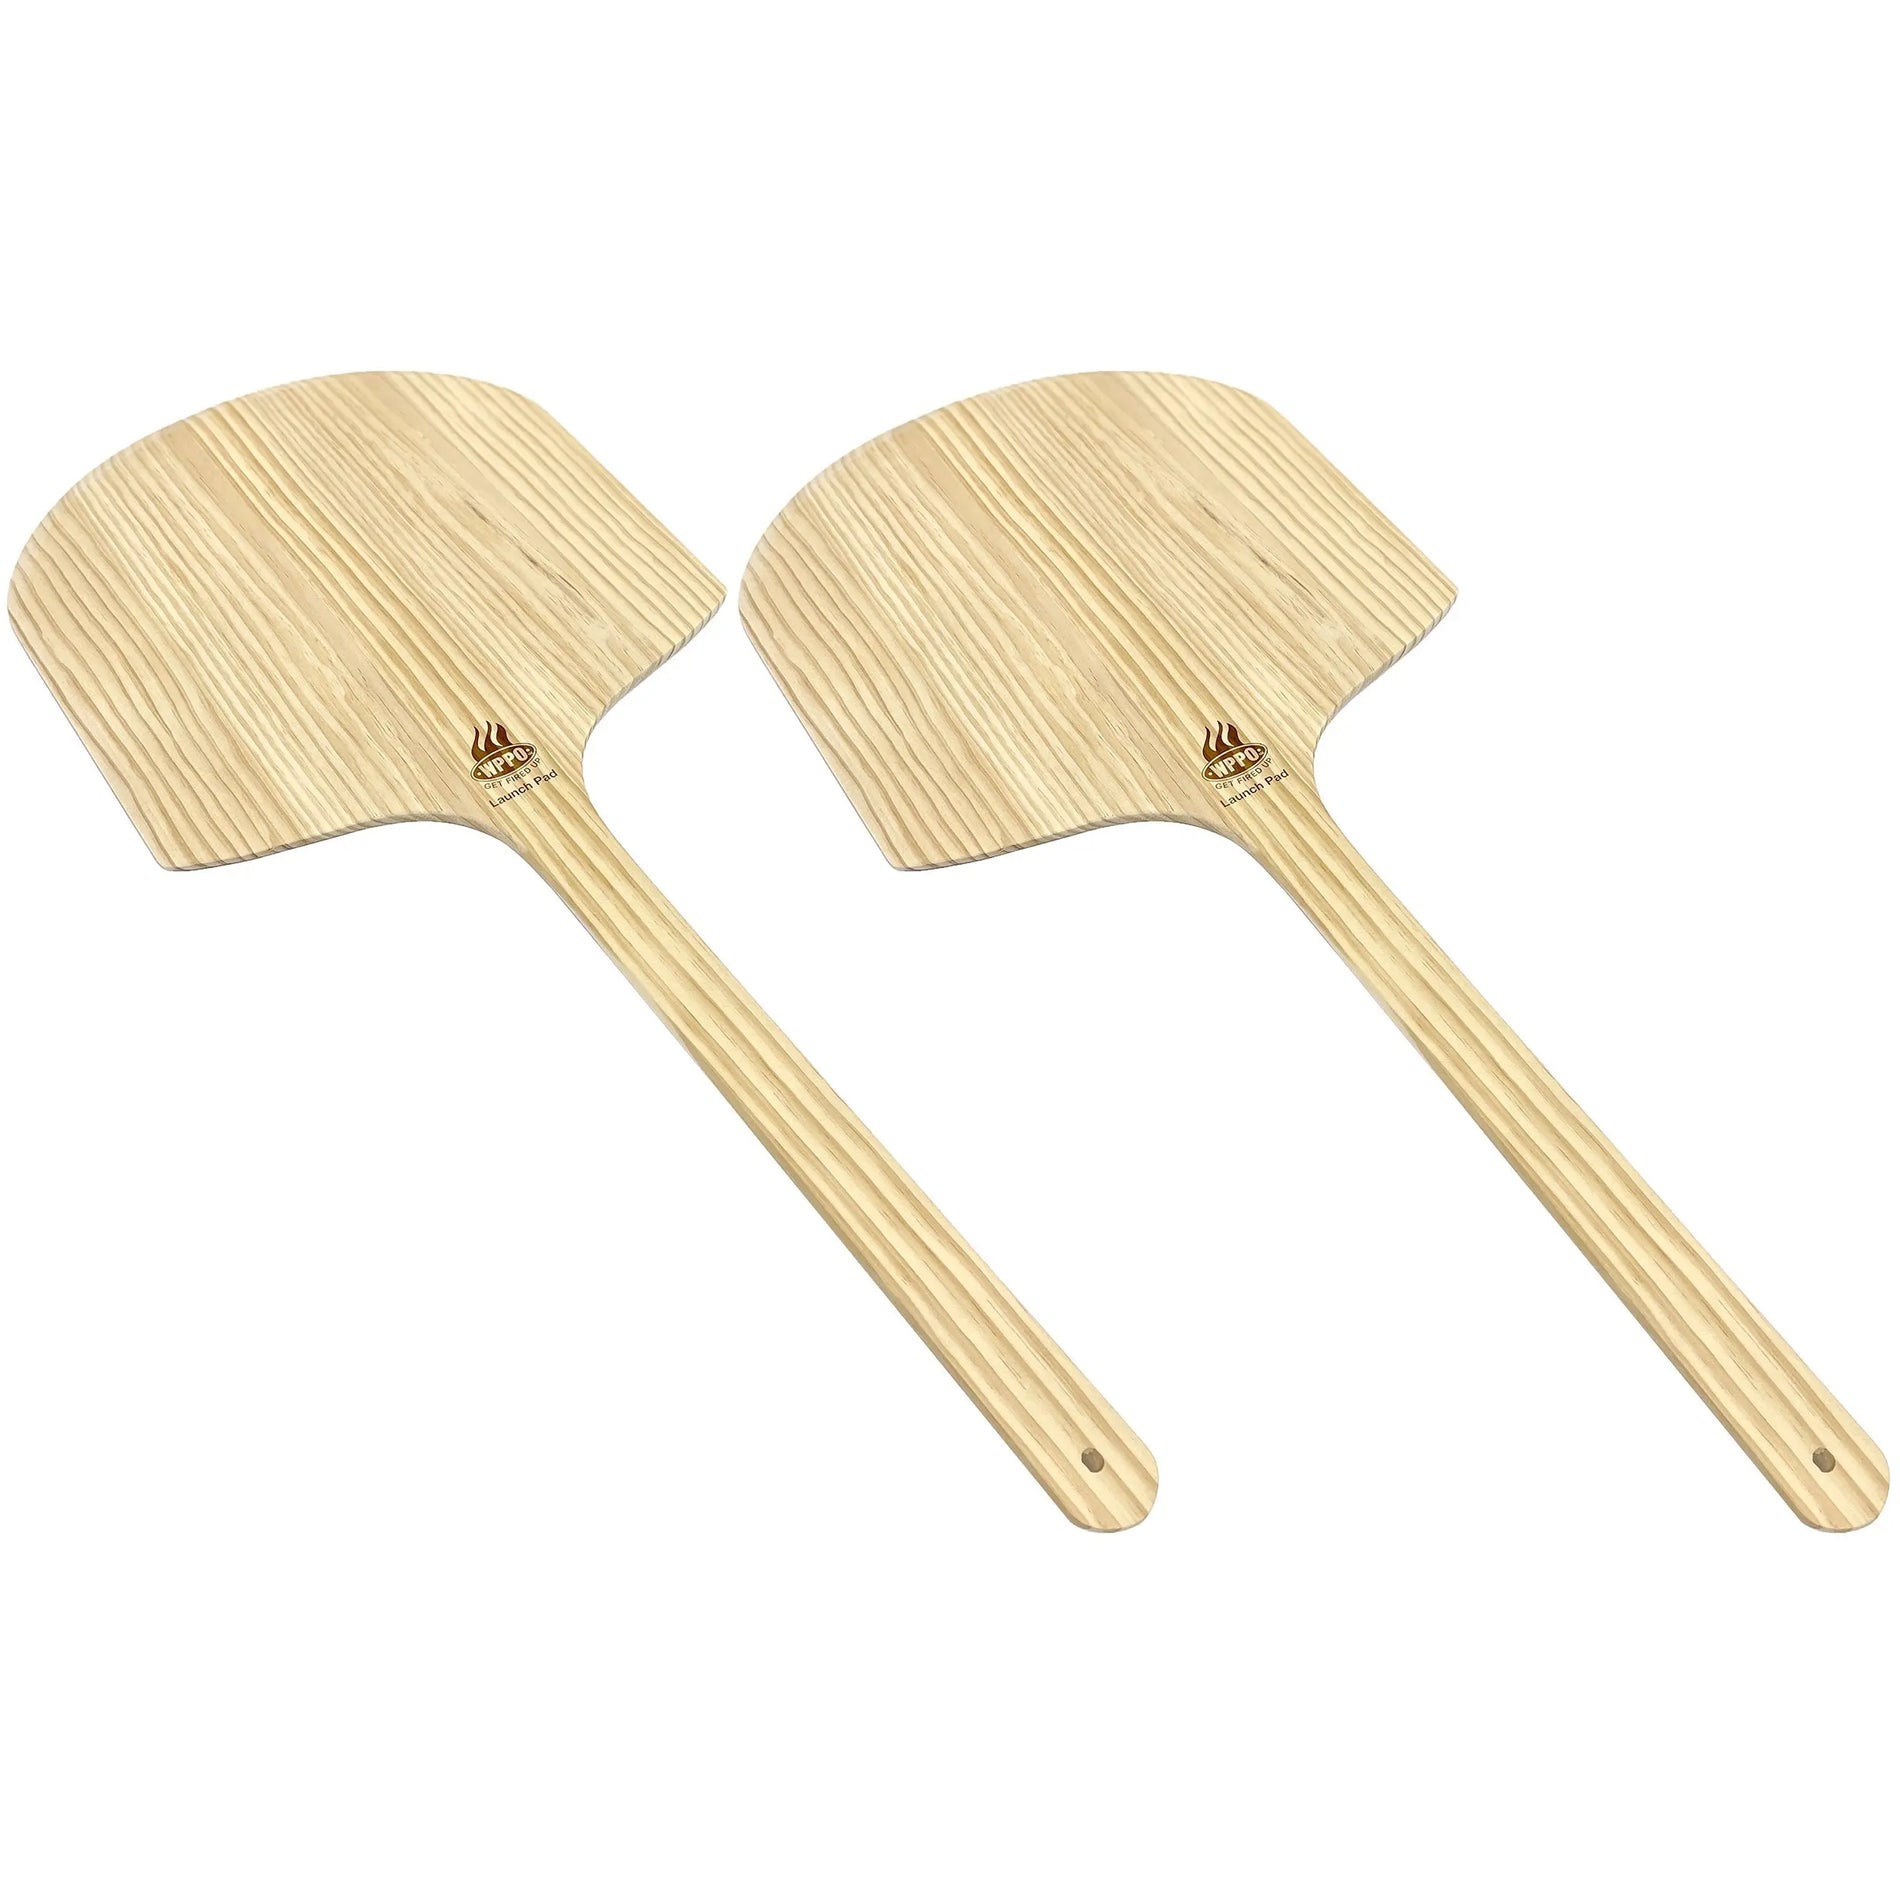 14”x36” Wooden Launch Pad - 2 pack - Land Supply Canada